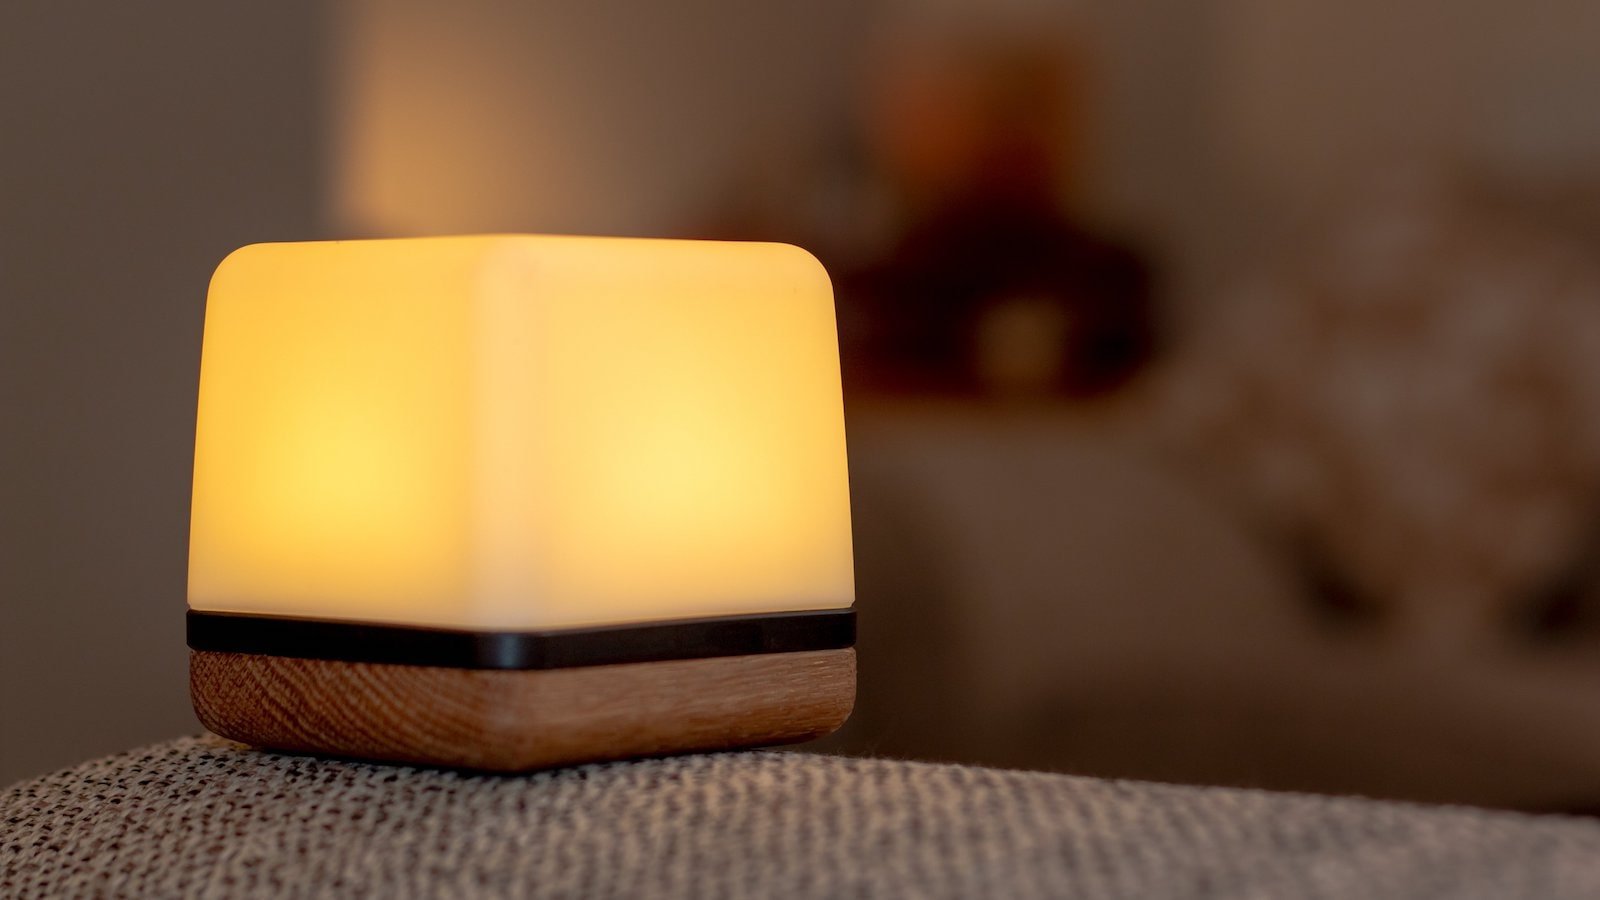 Luma³ relaxation cube reduces stress & boosts your well-being through breathing exercises